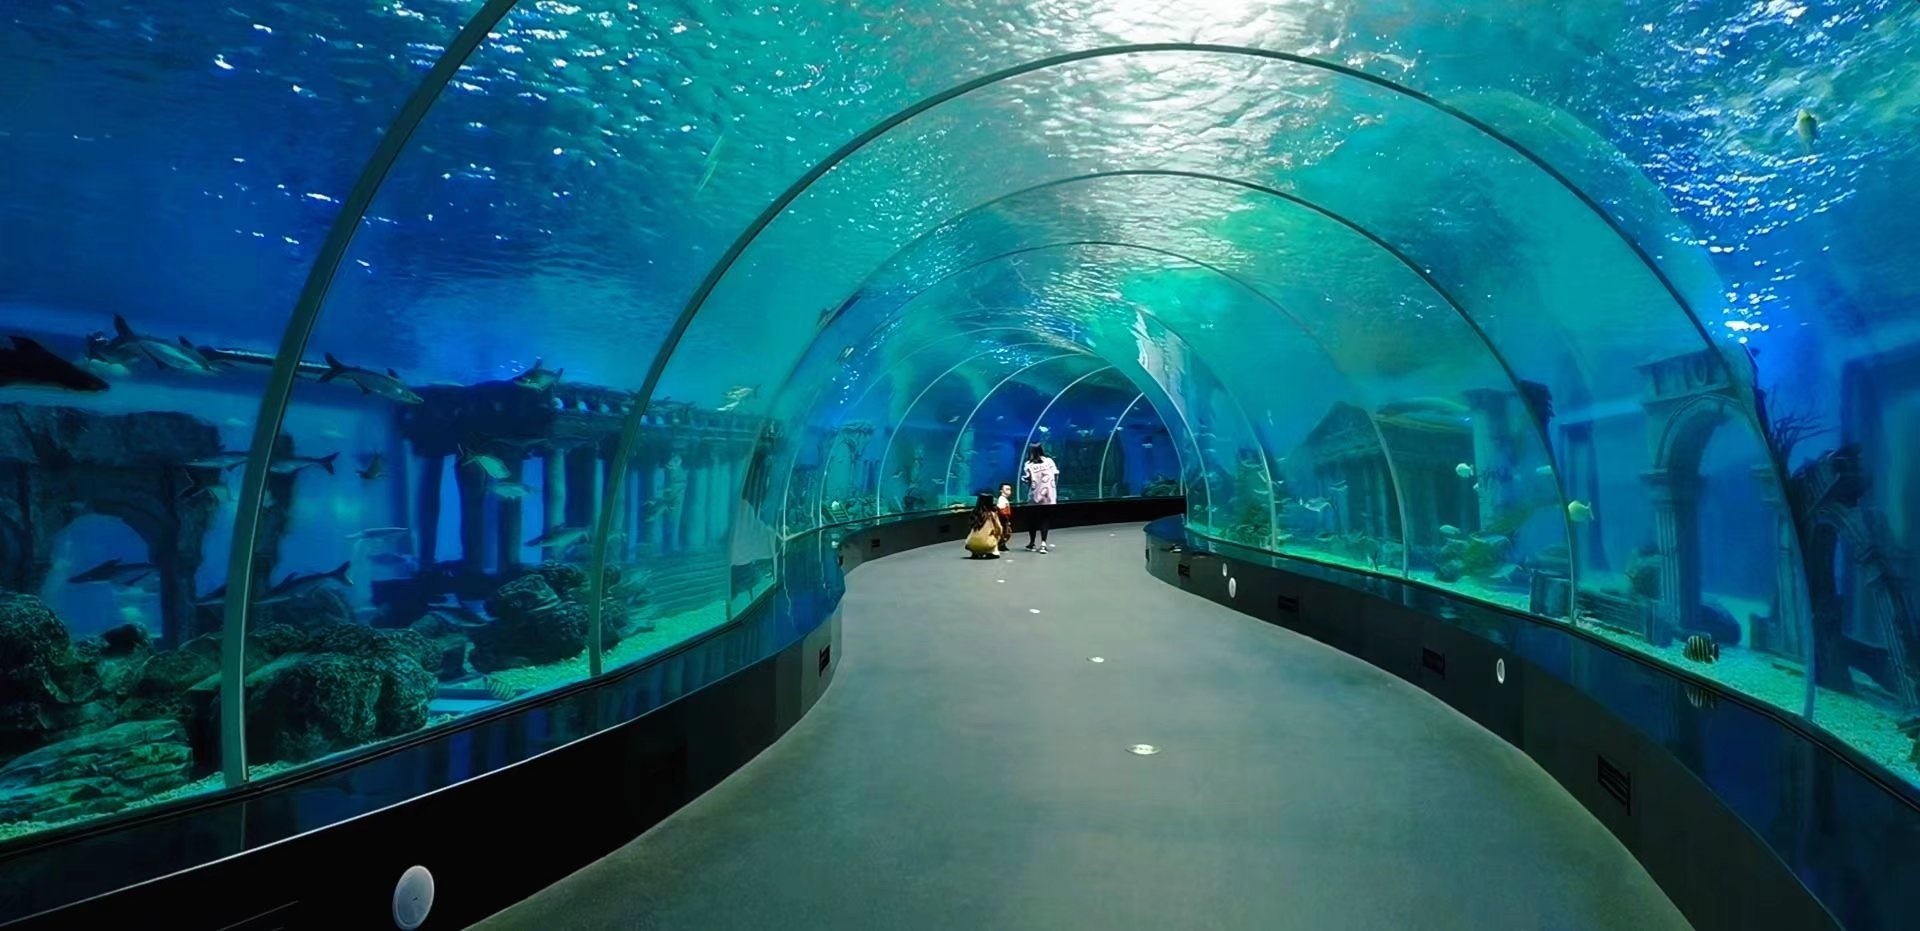 Why do aquarium underwater tunnels prefer to use acrylic instead of glass